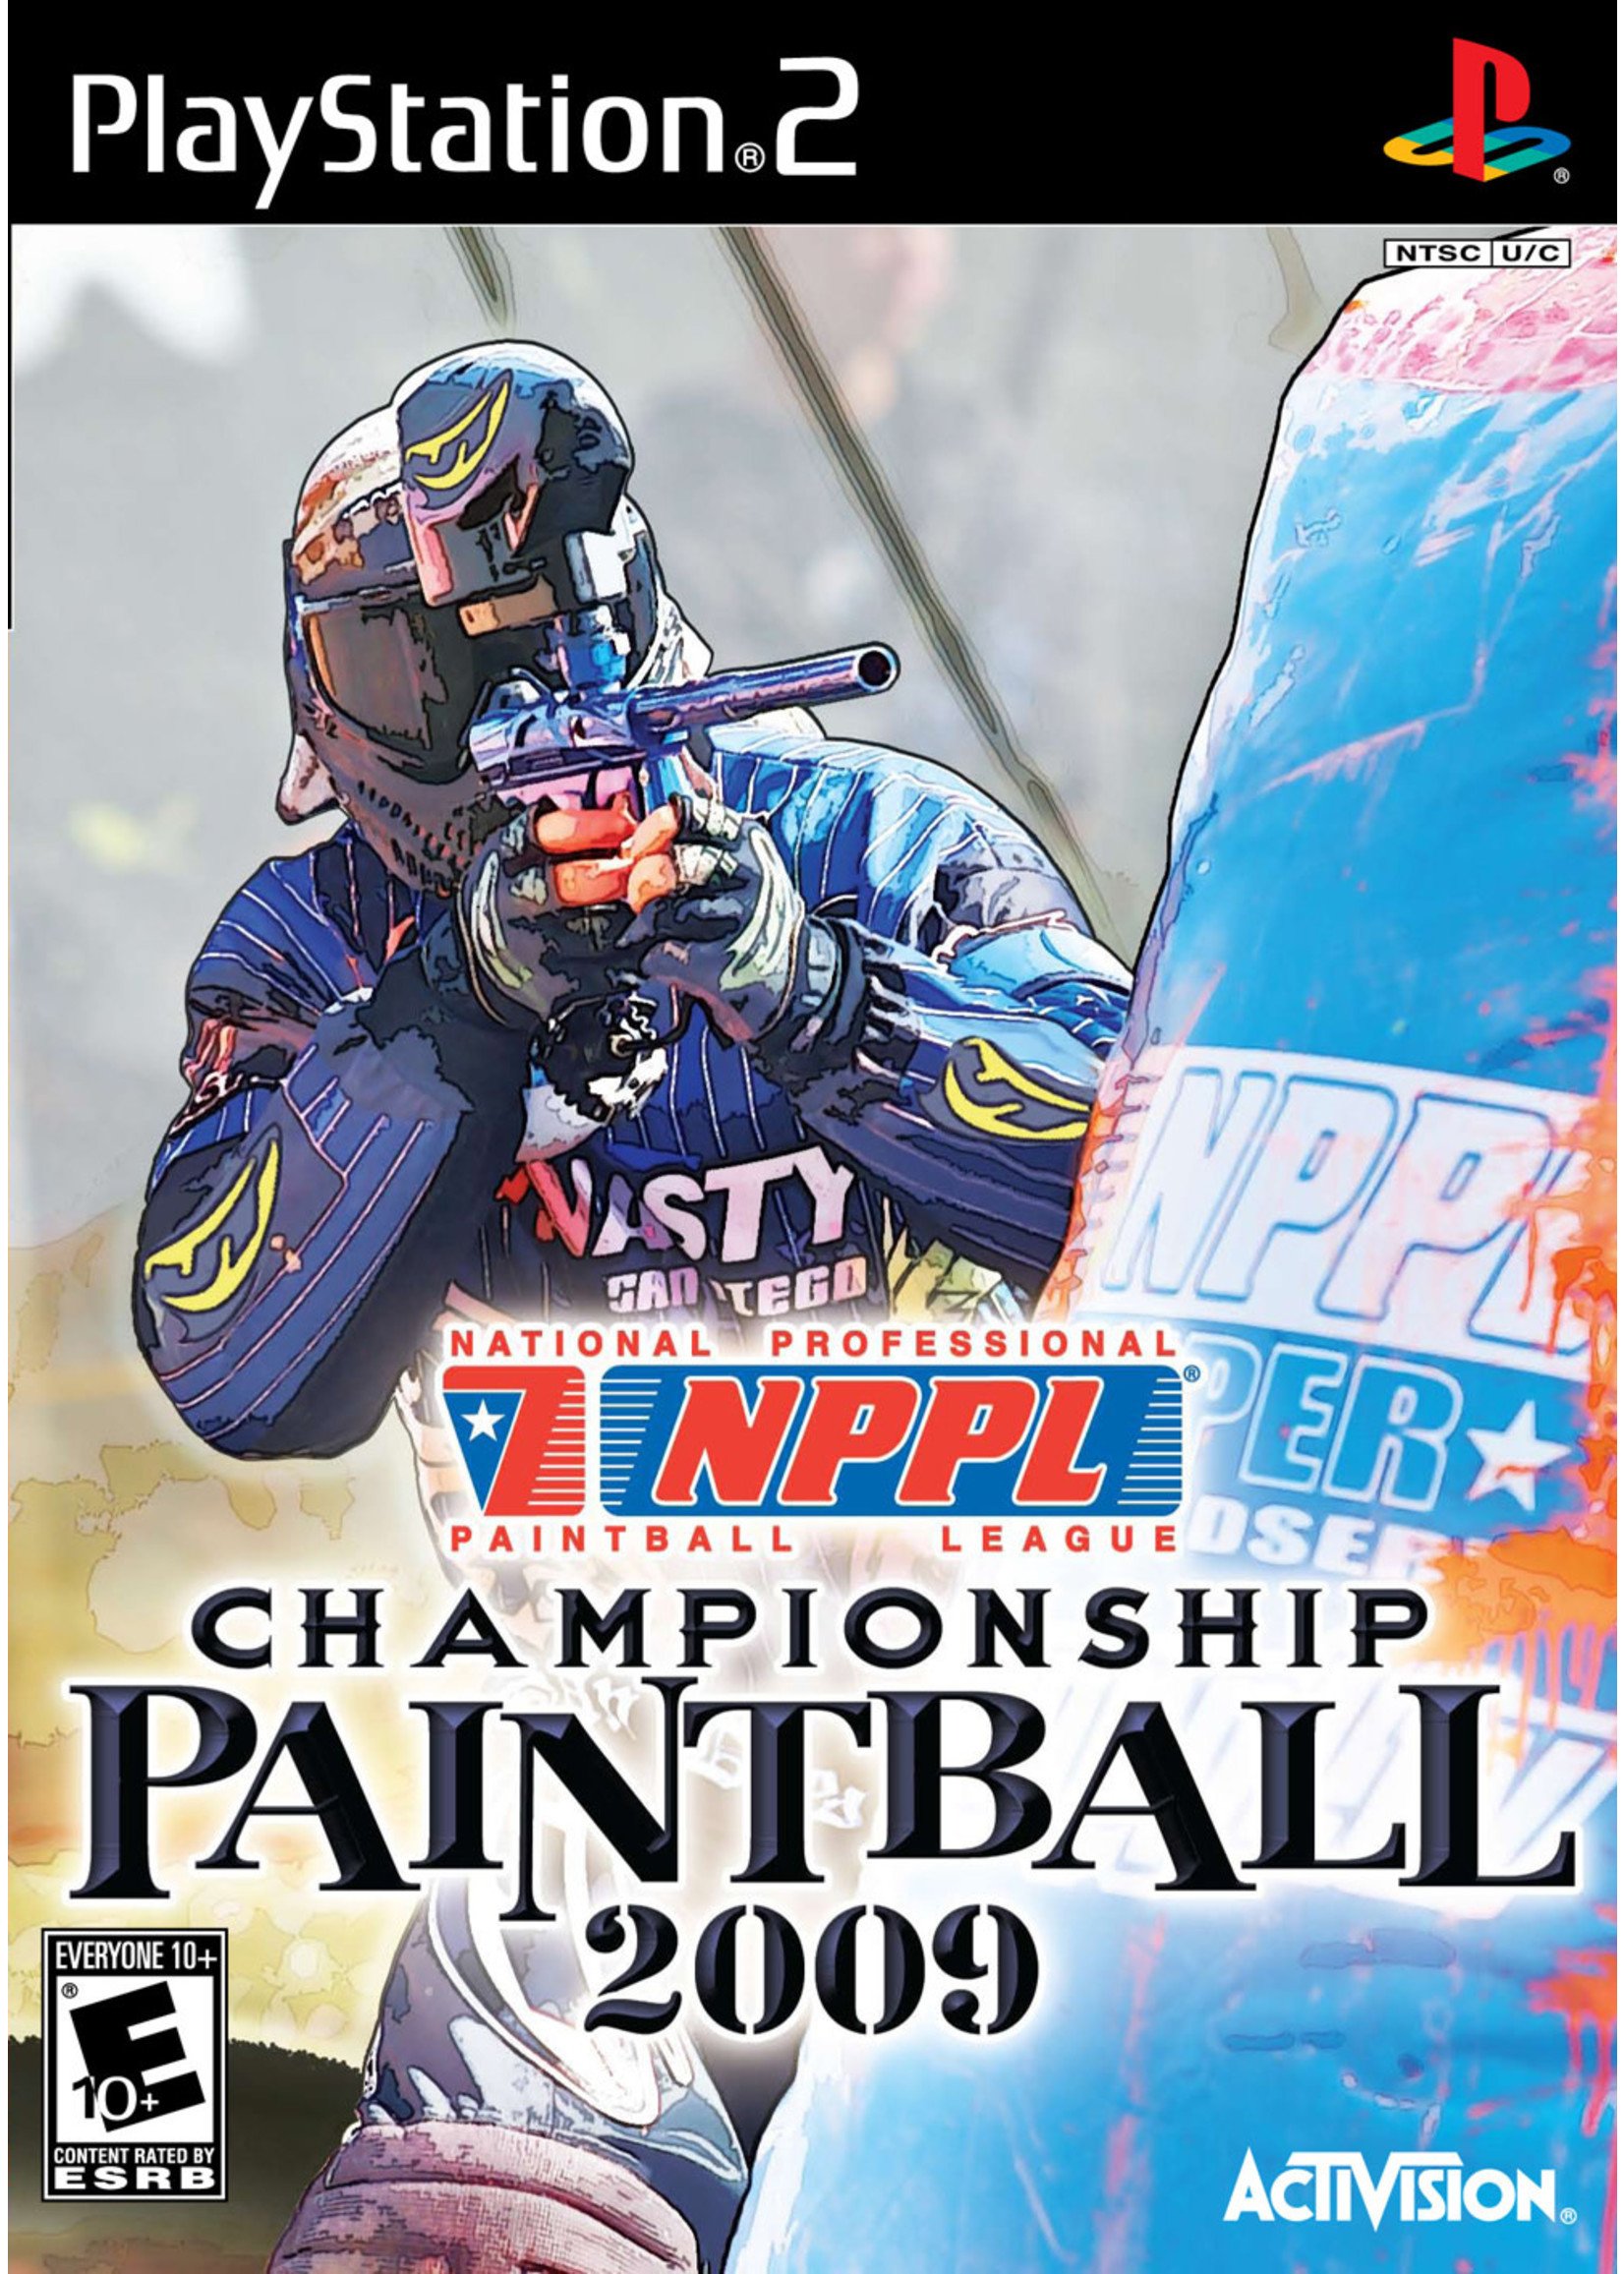 Sony Playstation 2 (PS2) NPPL Championship Paintball 2009